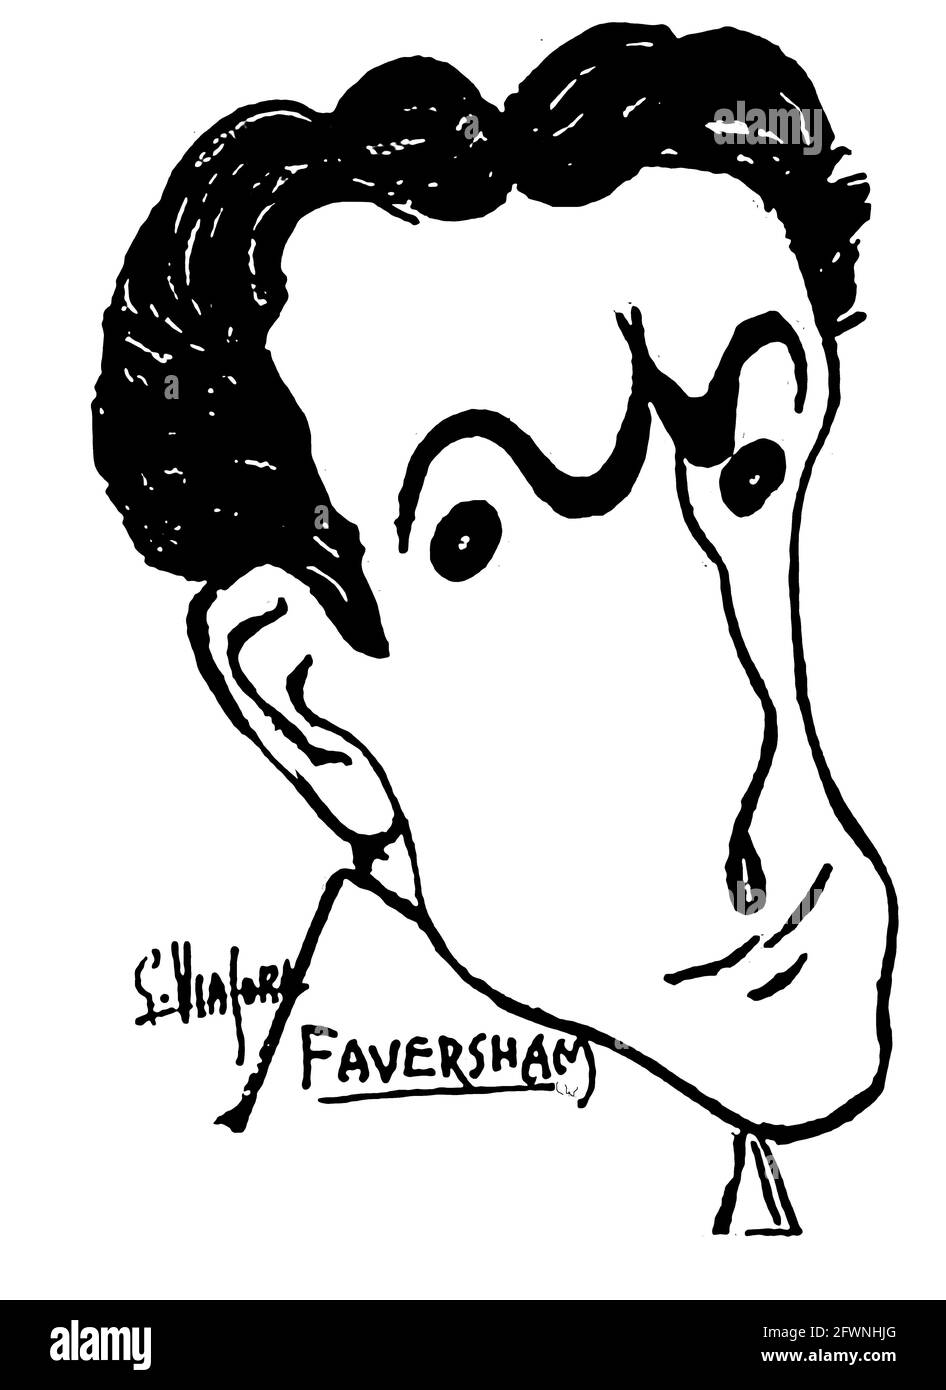 1919  cartoon caricatures of famous people of the time by artist Giovanni Viafora (USA) - English stage and film actor, manager, and producer WILLIAM FAVERSHAM (1868-1940)  He married  Julie Opp, (Julie Opp Faversham 1871-1921)  American international stage actress. in 1915 he entered the film industry with Metro Pictures and became a popular film star. Stock Photo